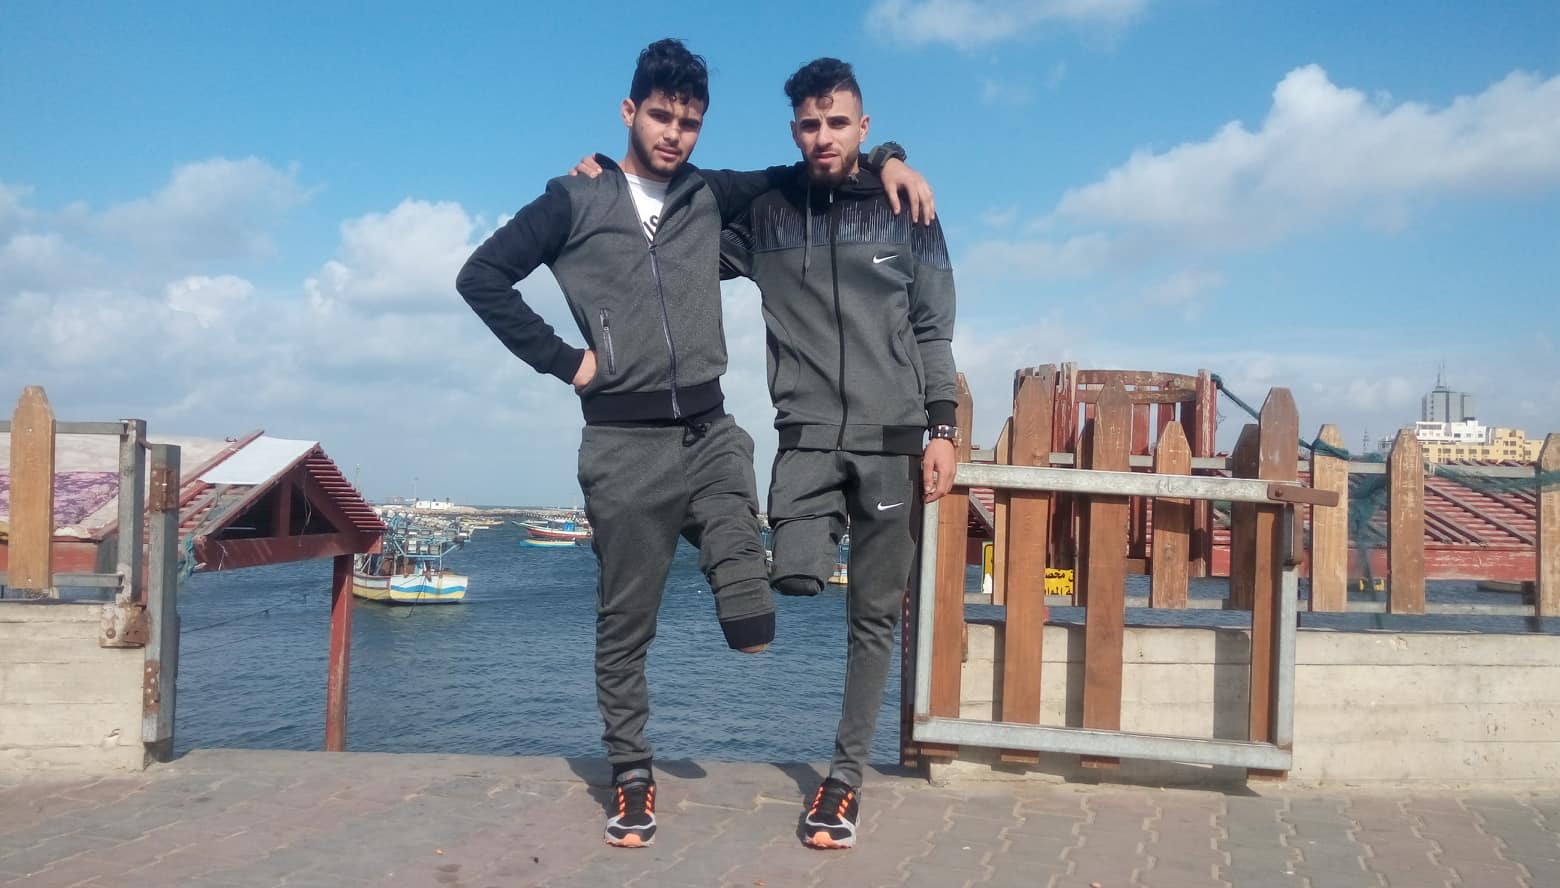 Two young men with amputated feet